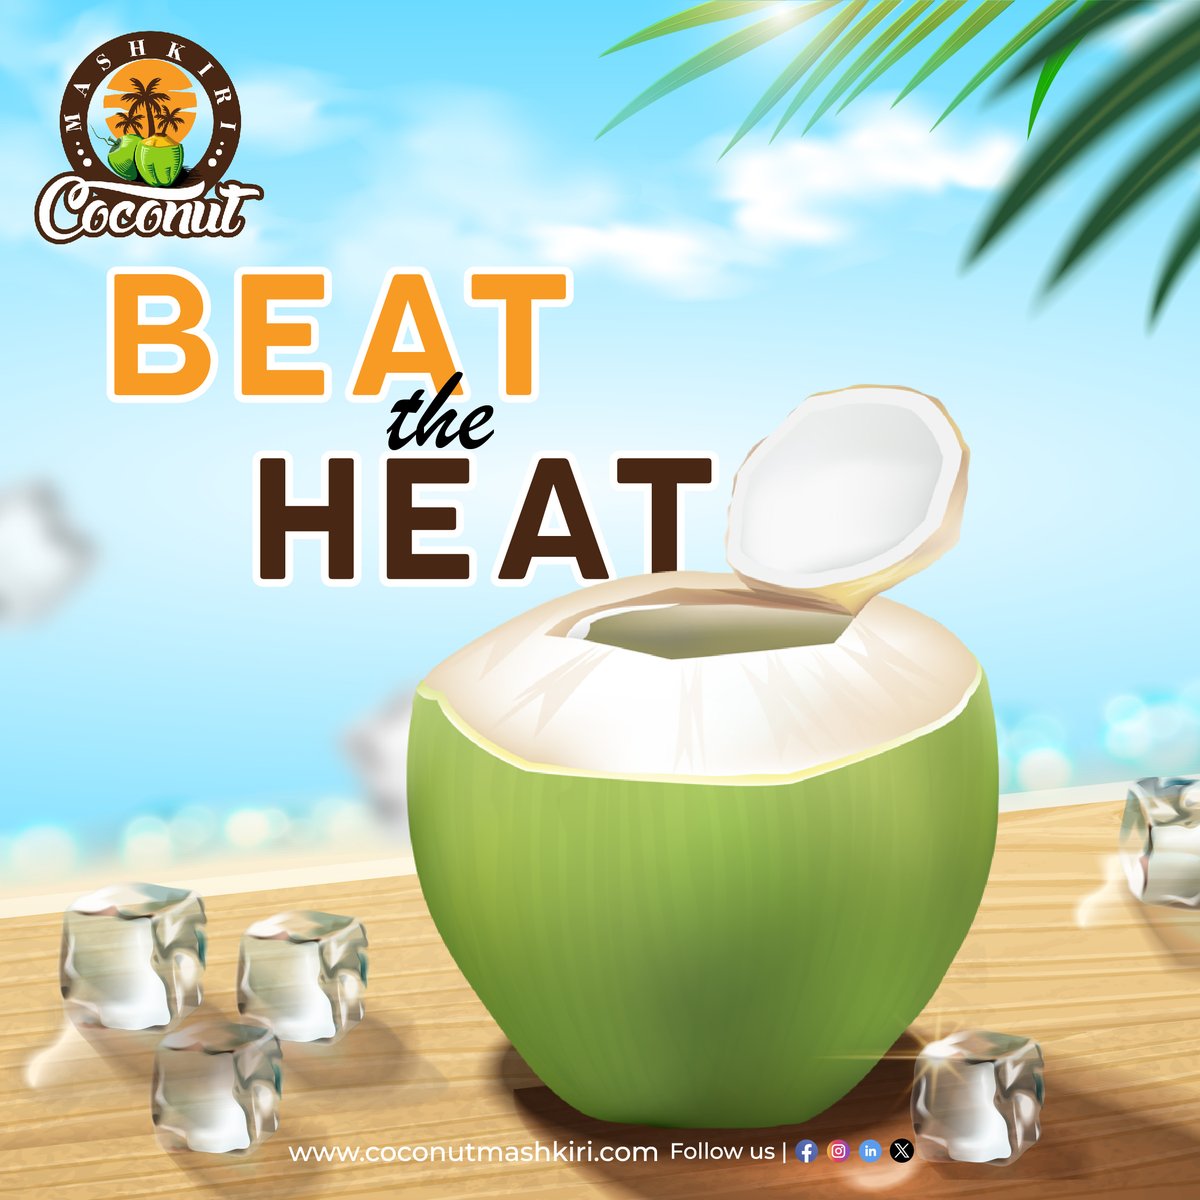 🥥☀️ Chill out this summer with #CoconutMashkiri! 🌴 Stay refreshed and hydrated in the heat. 🌞🥥

For more info
📞 Call: +91 84948 07691
🌐 Visit: coconutmashkiri.com

#tendercoconut #tendercoconutwater #tendercoconuts #coconutwater #coconutwaterbenefits #coconutmashkiri